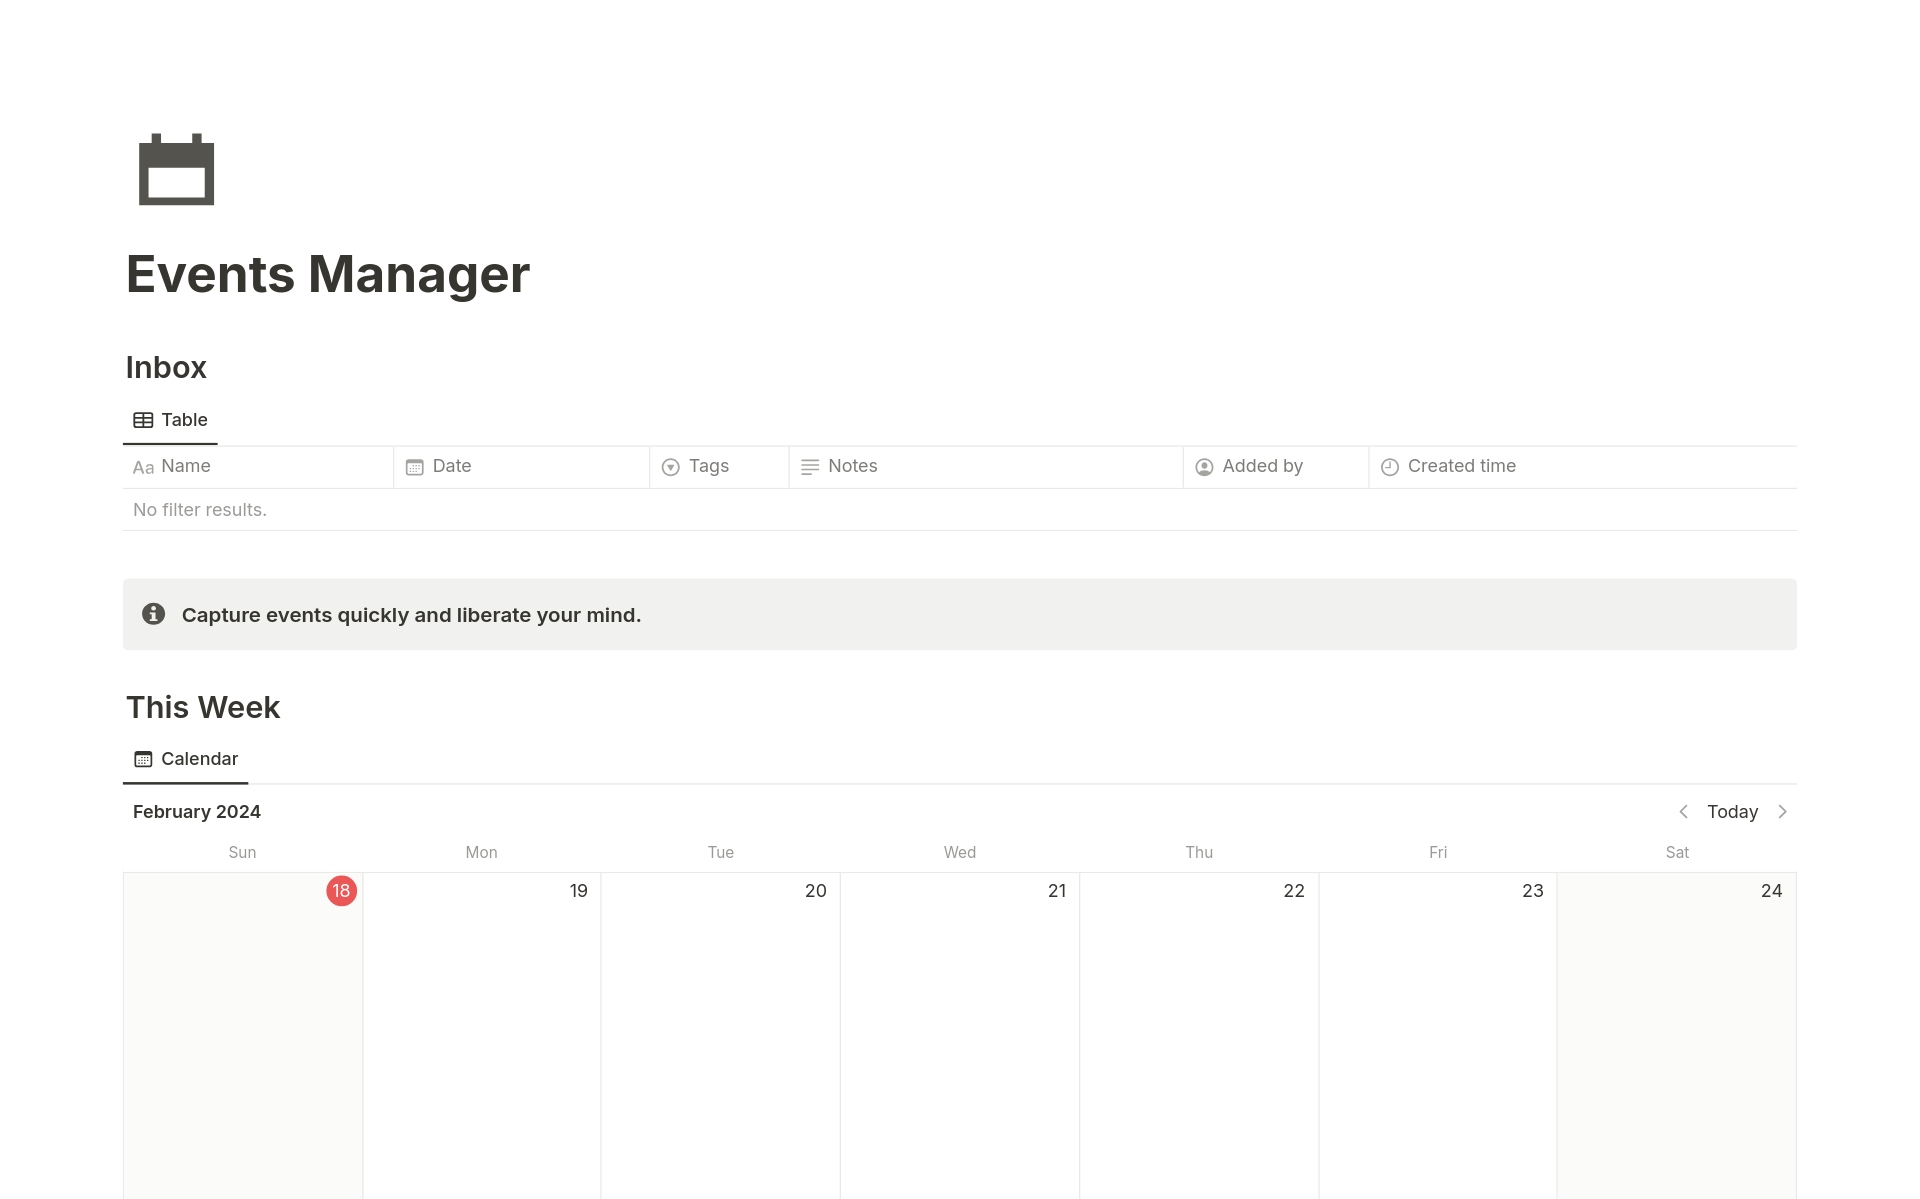 A template preview for Events Manager